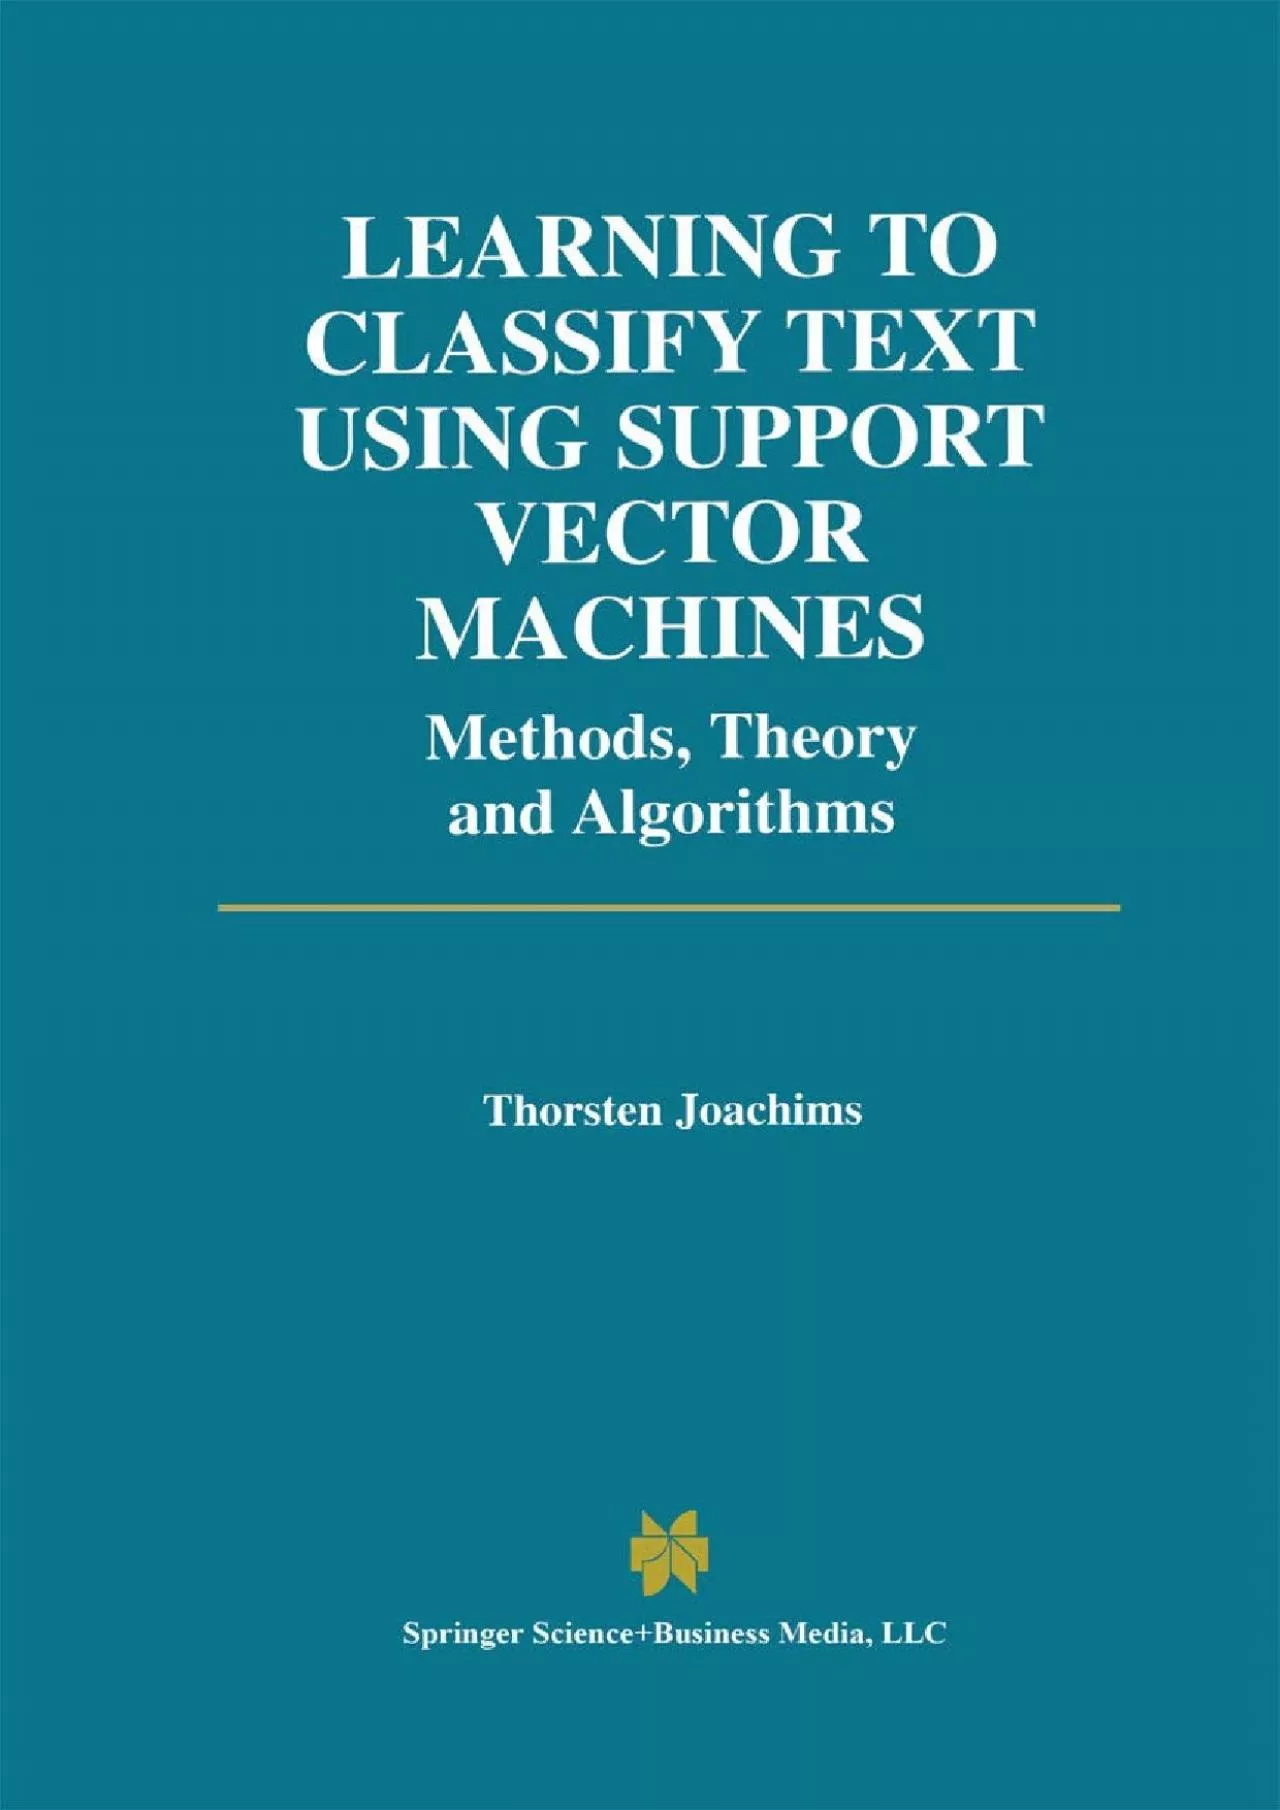 (BOOK)-Learning to Classify Text Using Support Vector Machines: Methods, Theory and Algorithms